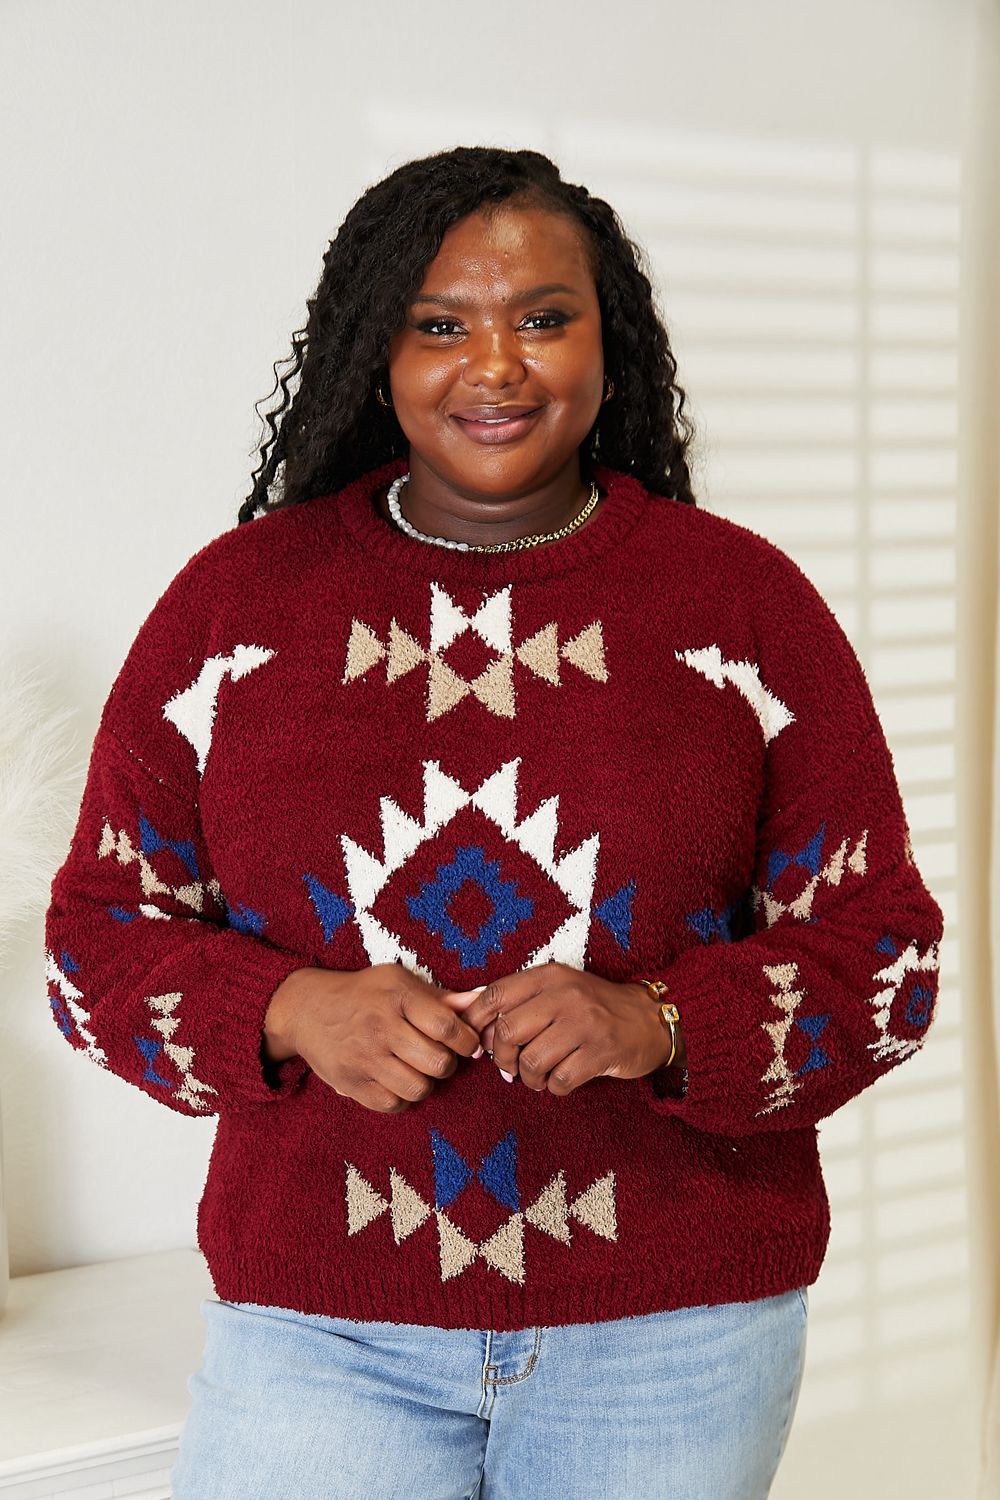 HEYSON Full Size Aztec Soft Fuzzy Sweater-Sweaters/Sweatshirts-Inspired by Justeen-Women's Clothing Boutique